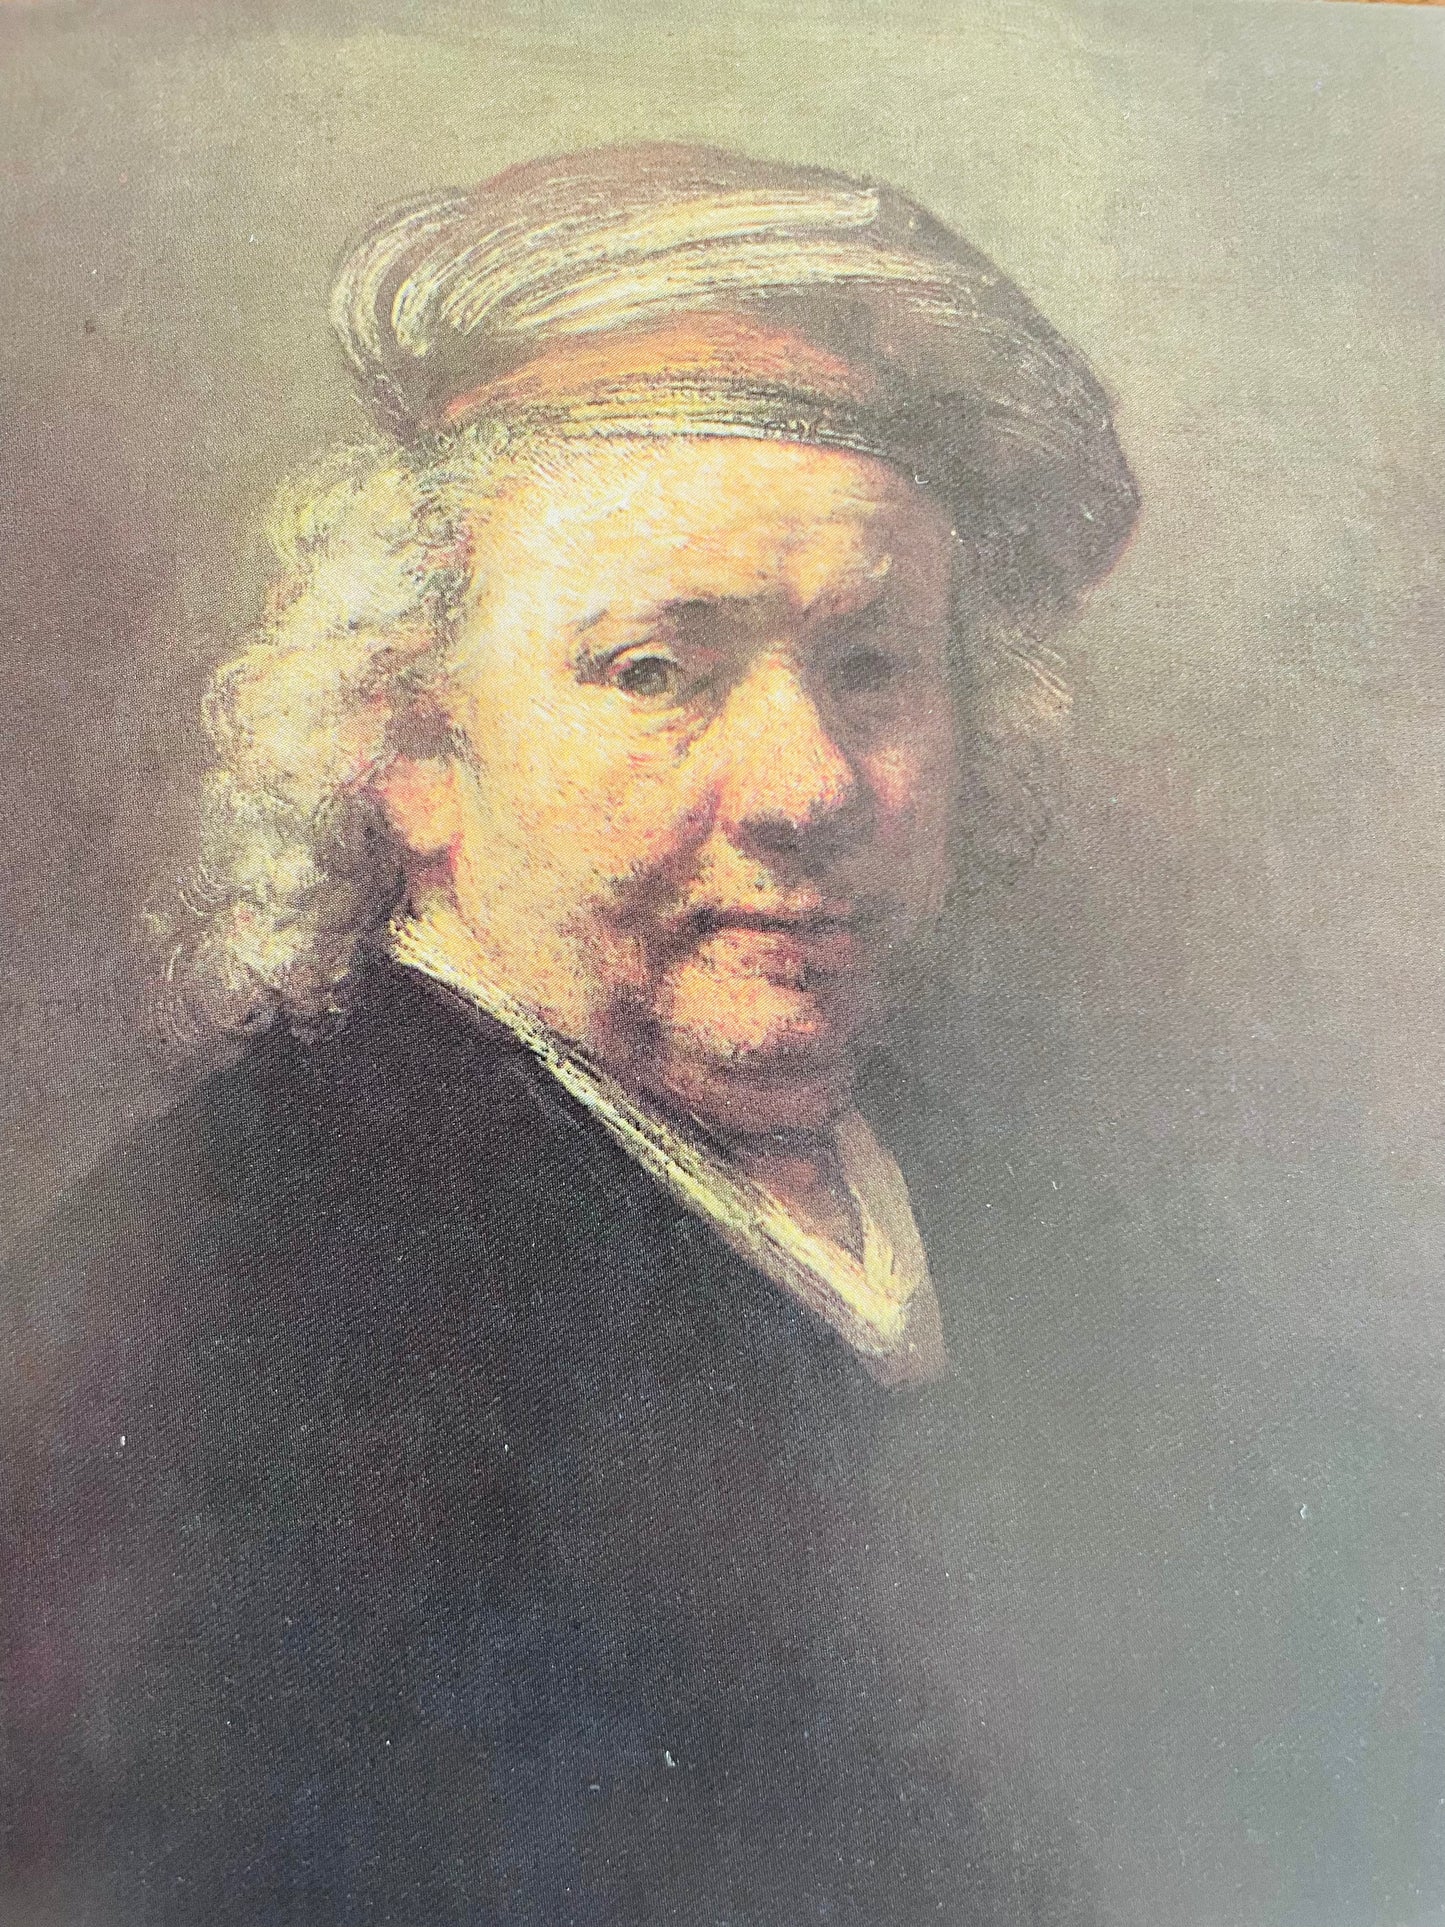 Rembrandt Self Portrait Postcard - 1982 Printed in England - 6" by 4"